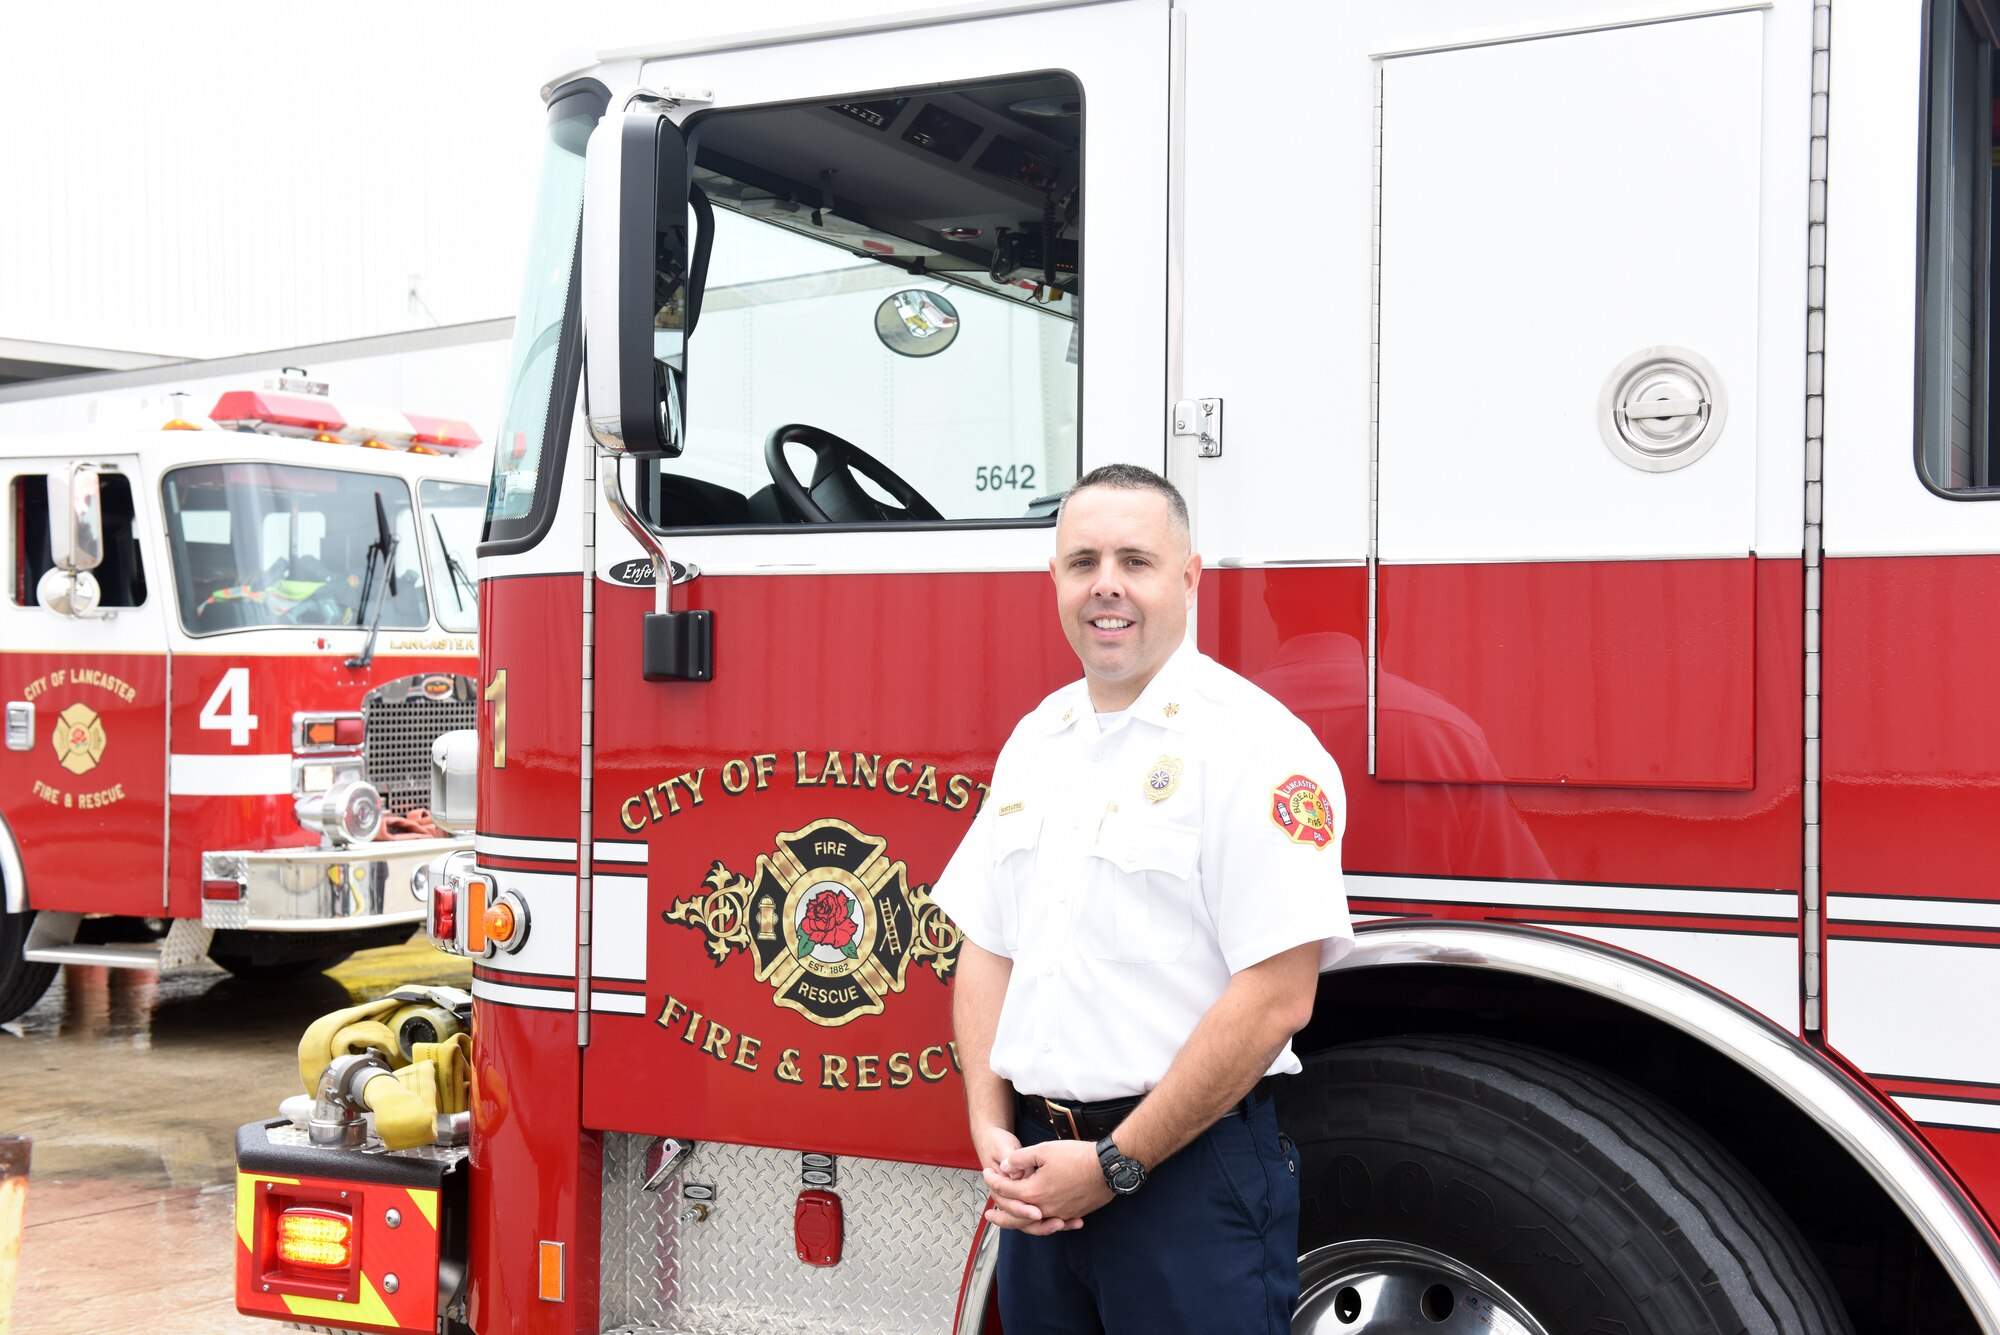 Scott Little, fire chief of Lancaster’s Bureau of Fire, poses for a picture Aug. 21, 2018, Lancaster, Pennsylvania. Little is the first fire chief hired from outside of the organization since Lancaster’s Bureau of Fire was organized as a career fire department in 1882. (U.S. Air National Guard photo by Senior Airman Julia Sorber/Released)